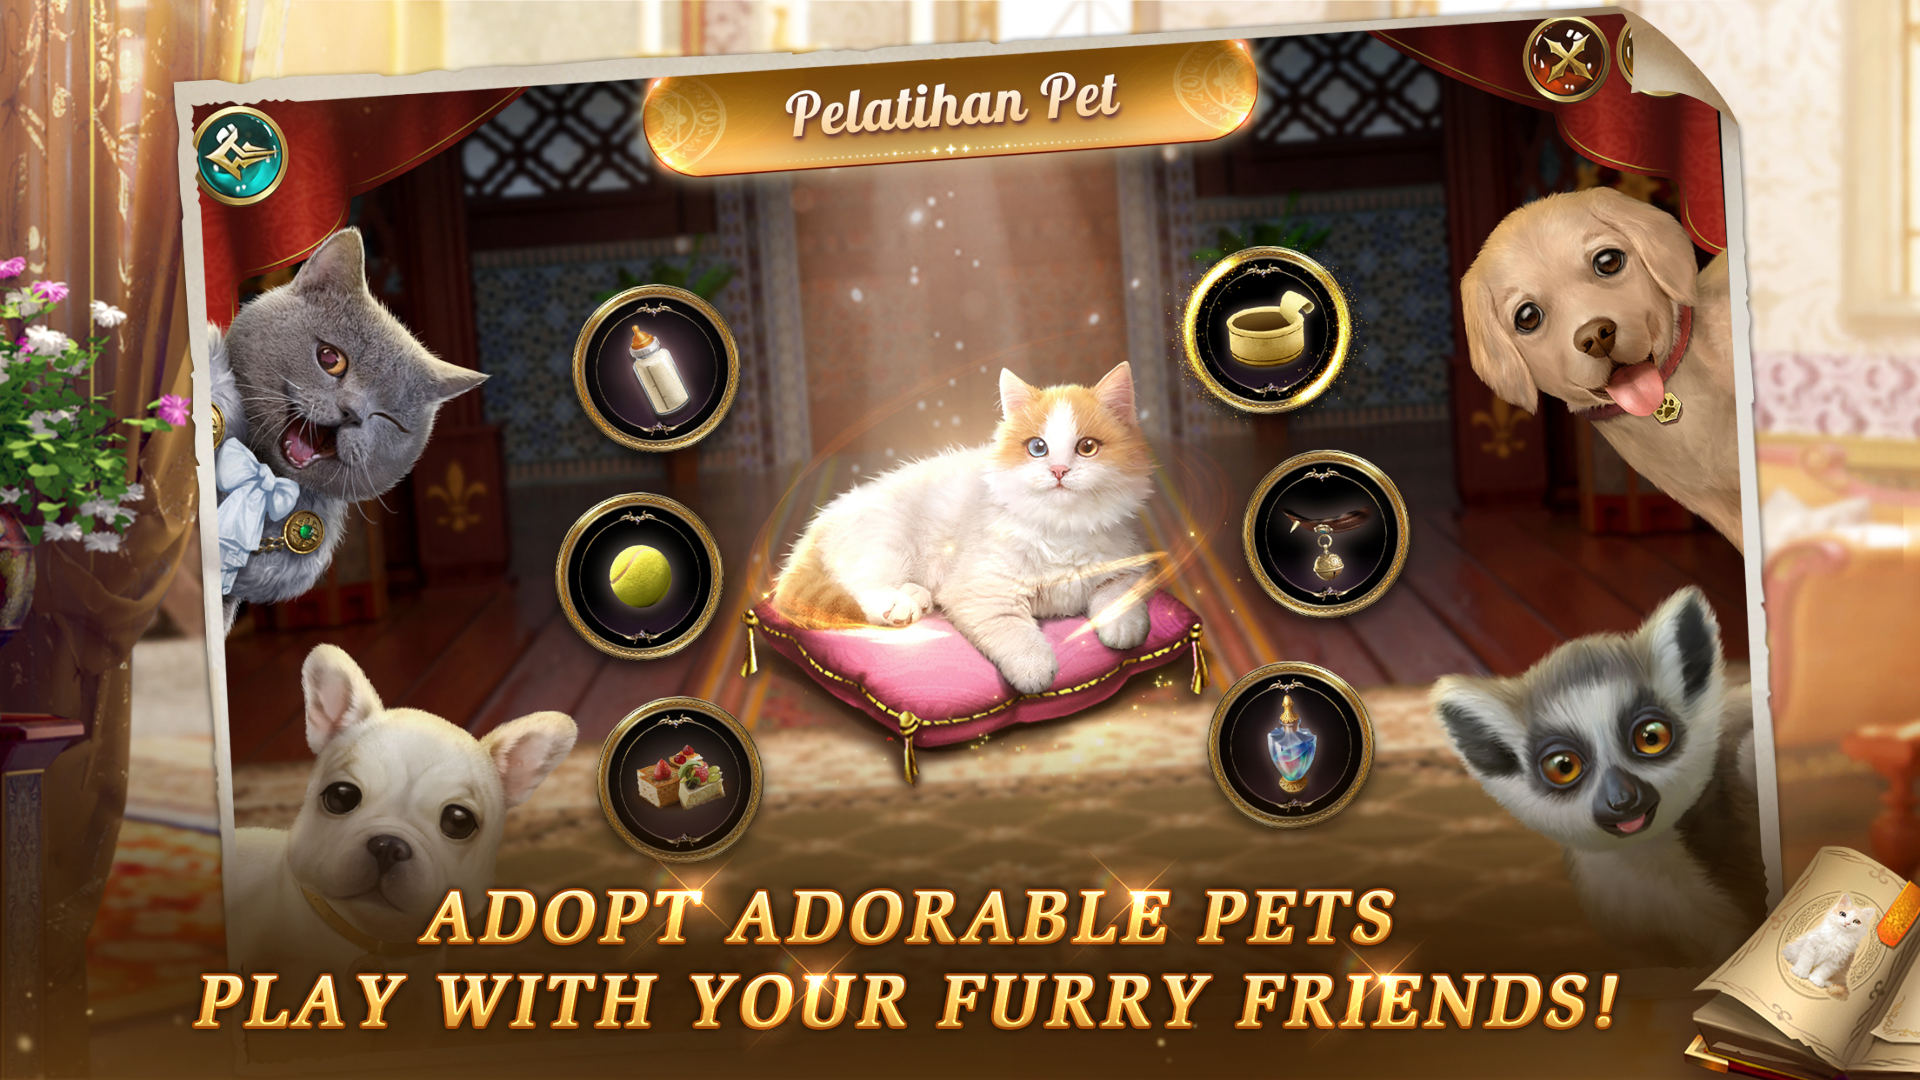 Game of Sultans pet pen – how to get your very own pet - PNGPhoneTok.com